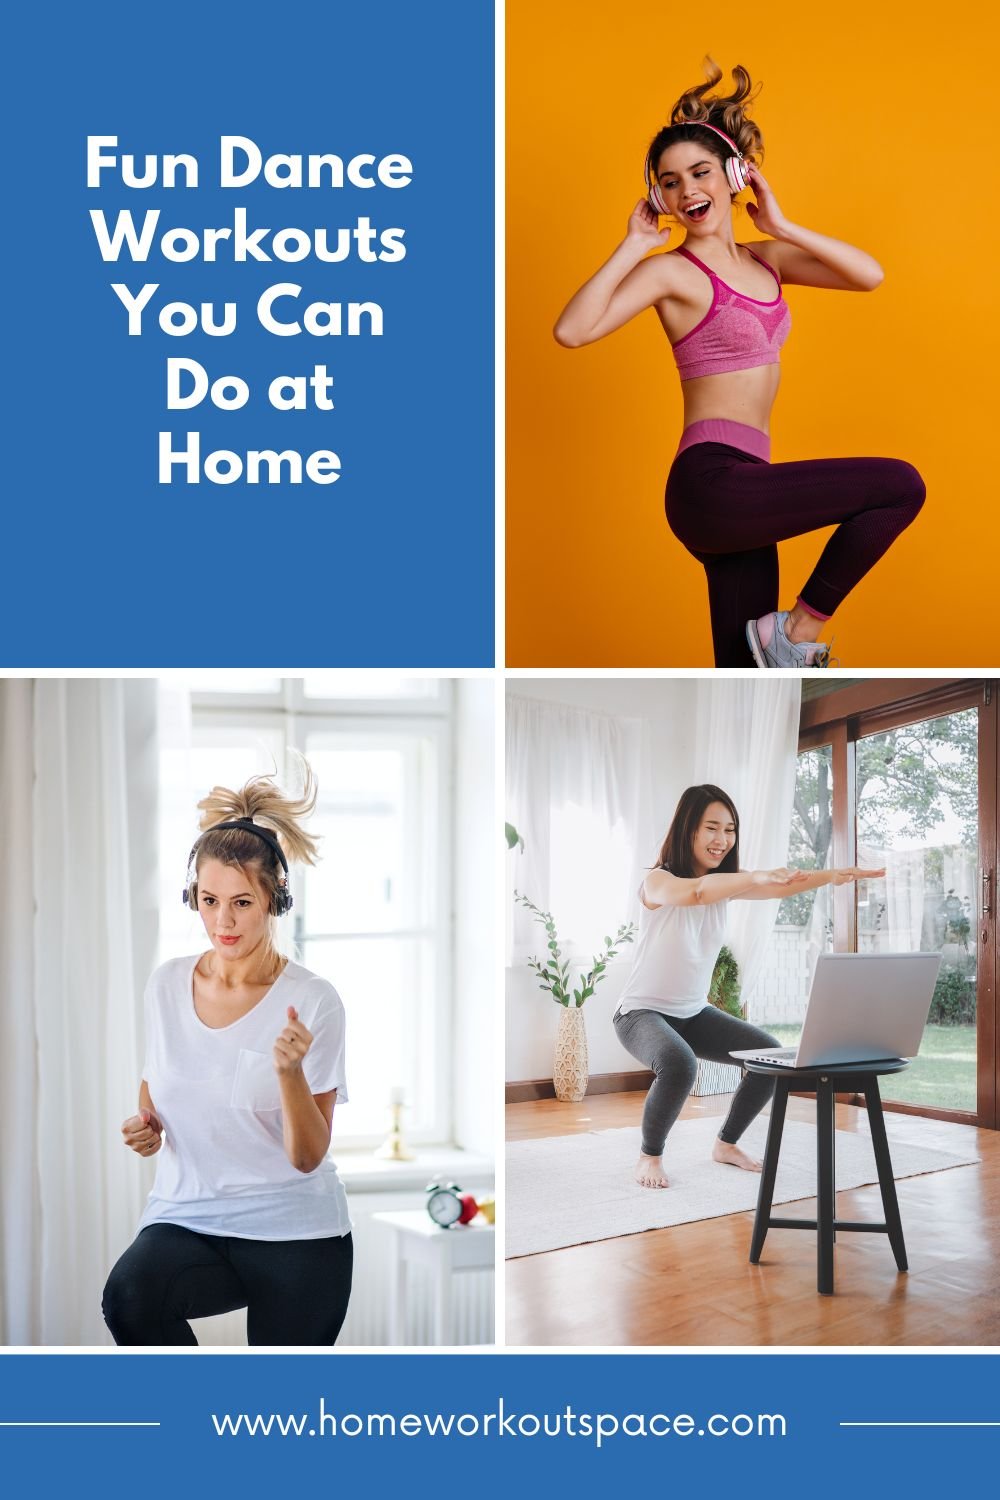 Fun Dance Workouts You Can Do at Home